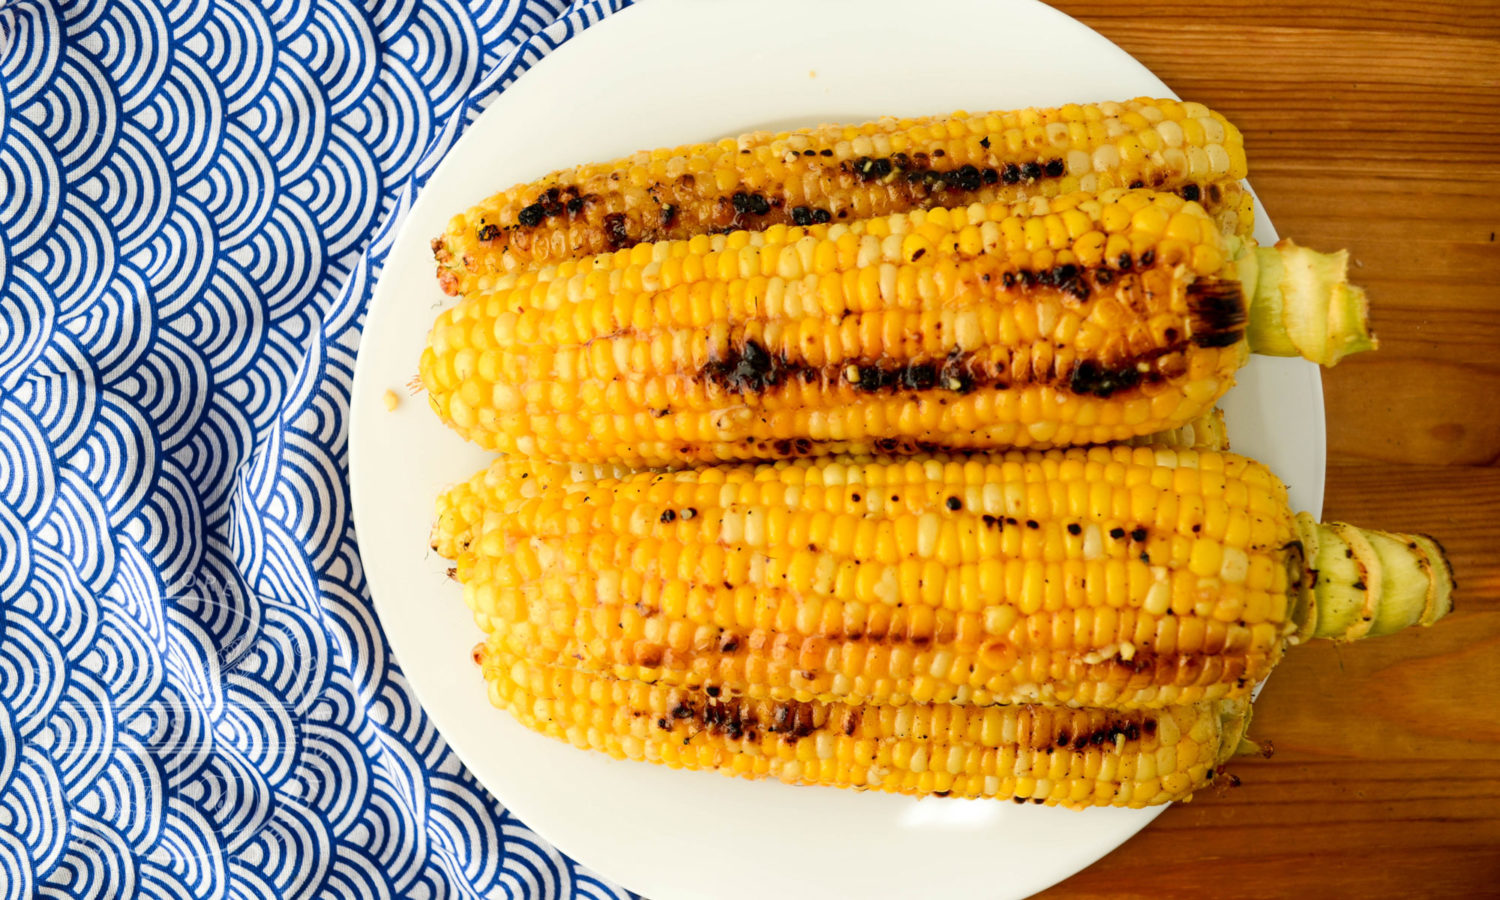 Sweet corn grilled with butter, miso, and shio koji